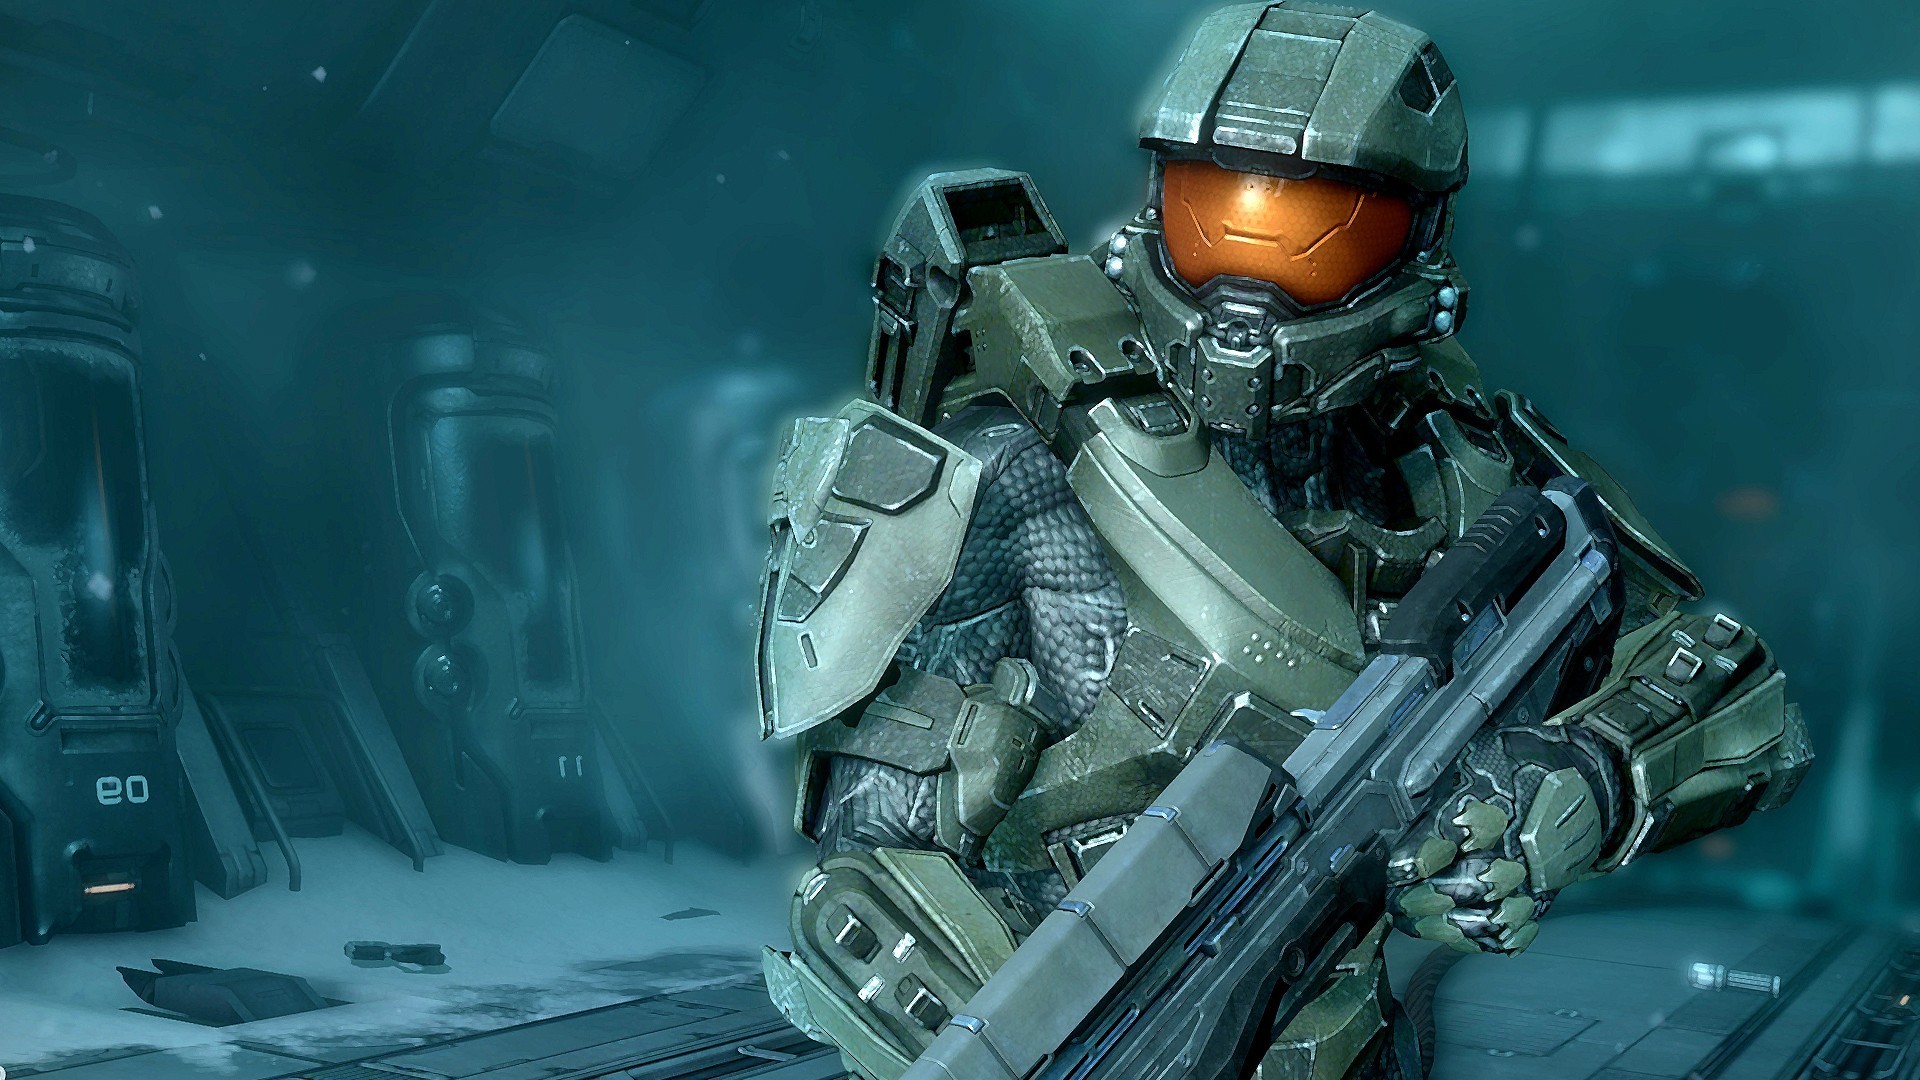 Halo 4 Master Chief Wallpaper 71 Pictures.